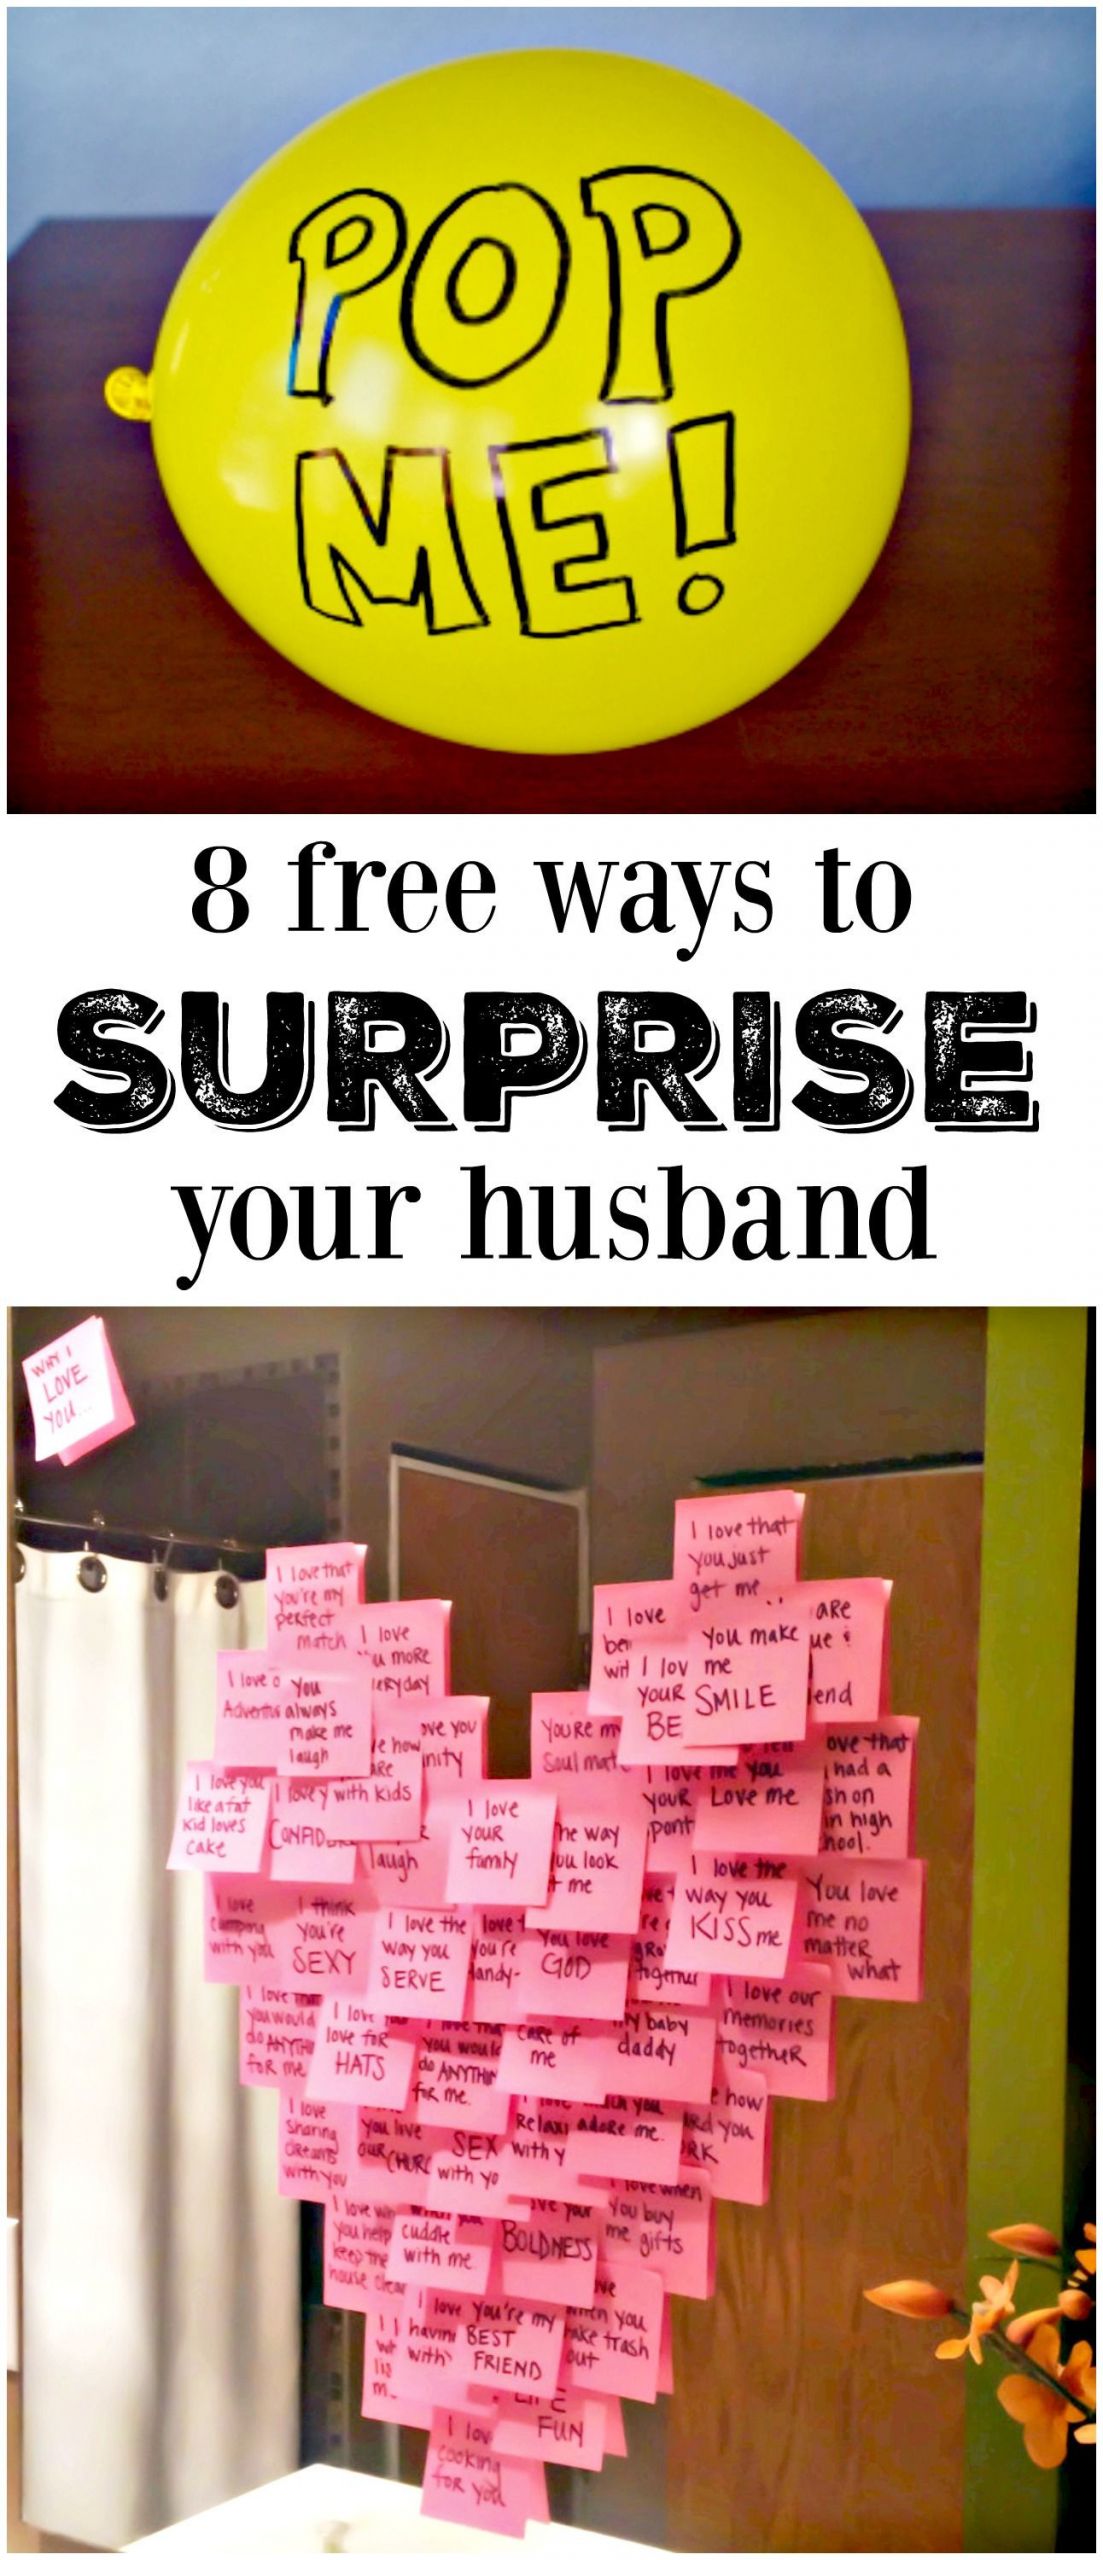 Valentines Day Gift Ideas For My Husband
 8 Meaningful Ways to Make His Day